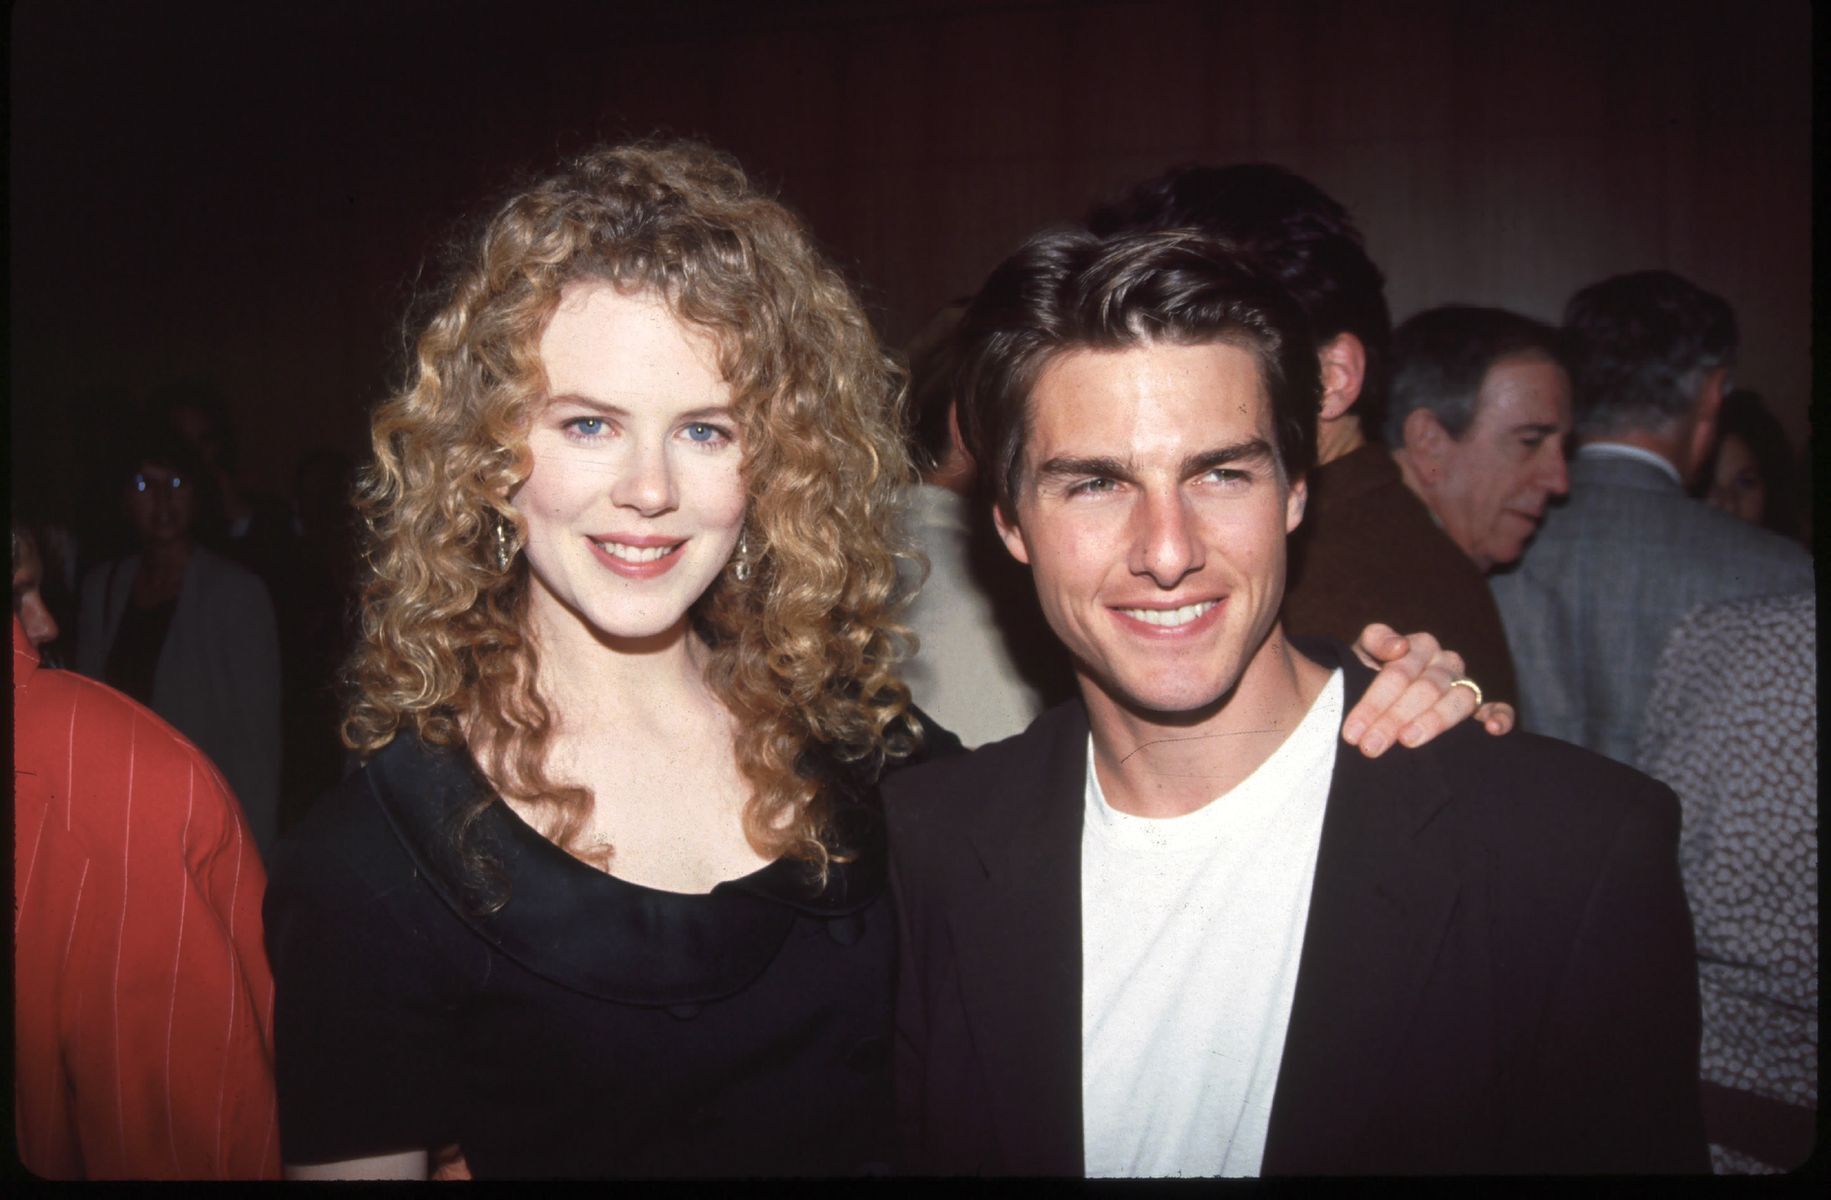 <p>It was 1989’s <em>Days of Thunder</em> that brought Cruise into contact with his second wife, <a href="https://www.imdb.com/name/nm0000173/">Nicole Kidman</a>, just two days after he filed for divorce from Rogers. Cruise went on to tell <a href="https://www.vanityfair.com/hollywood/1995/07/kidman-1995-07"><em>Vanity Fair</em></a> that meeting the Australian starlet was “instant lust.” They tied the knot within a year. </p>